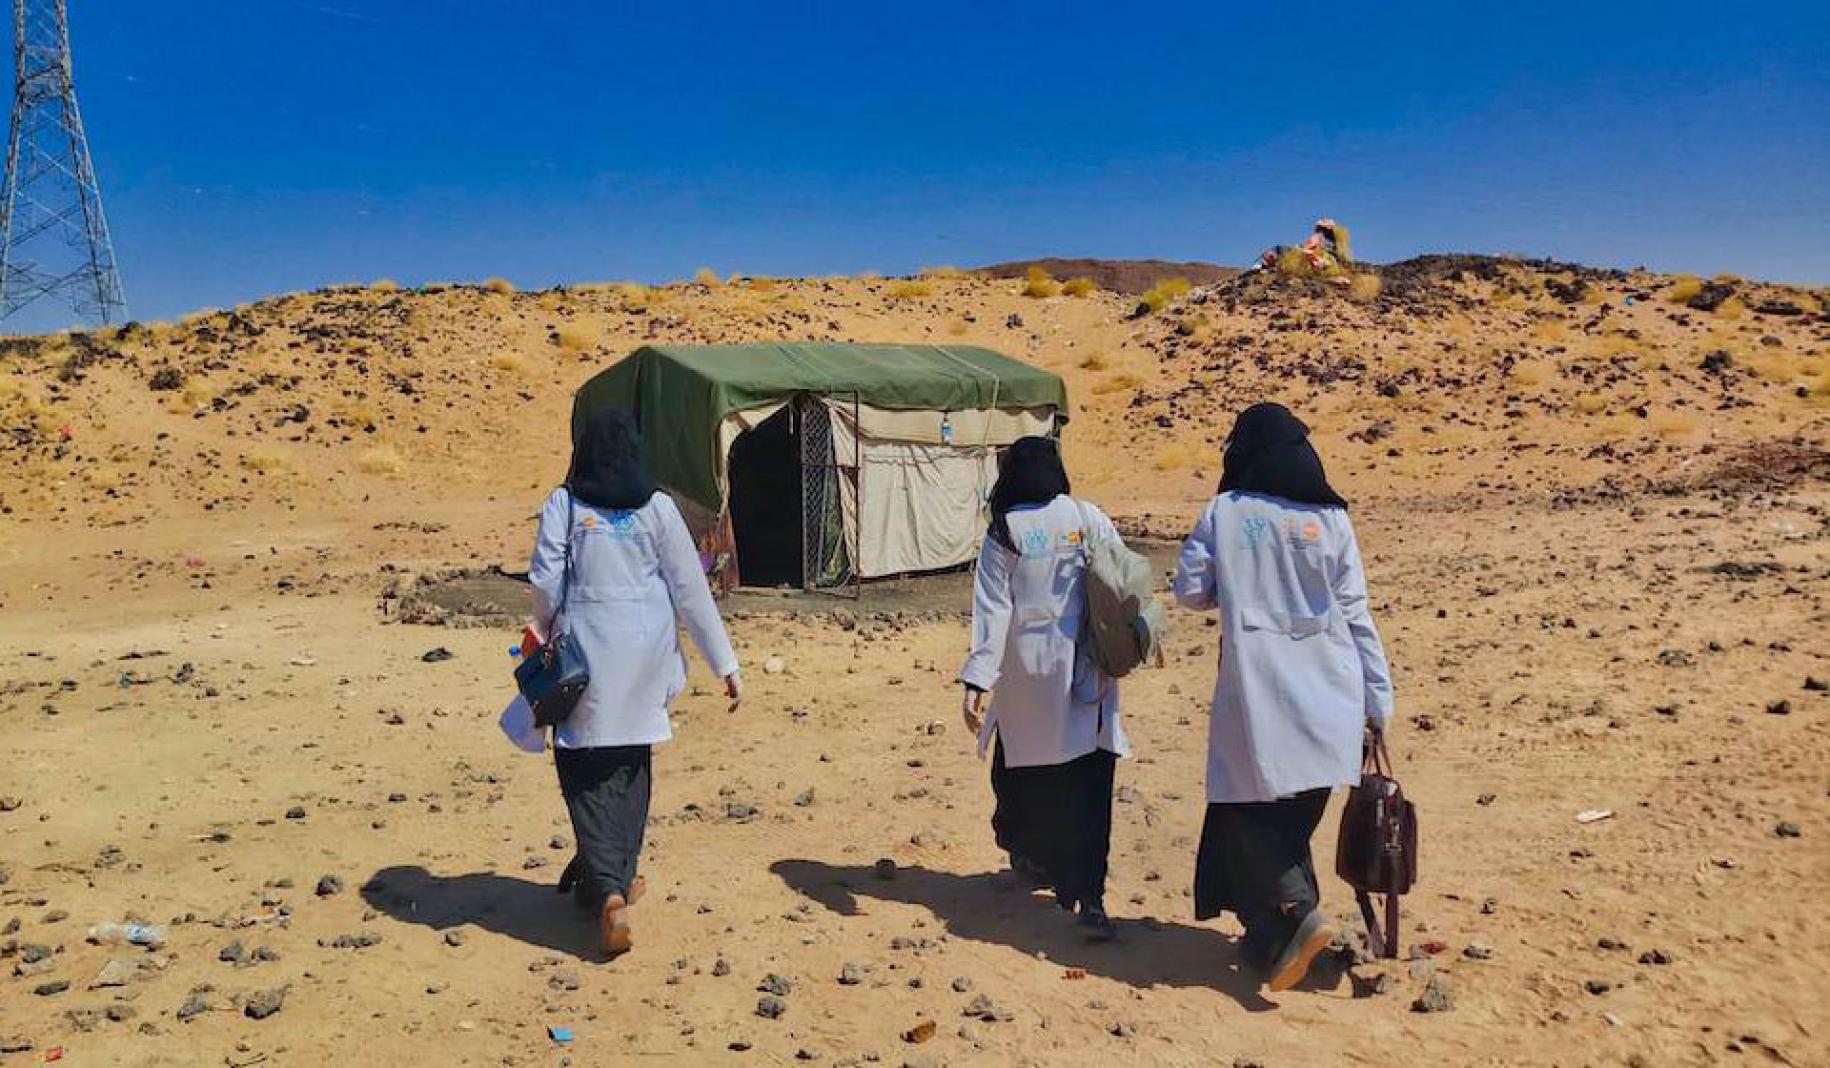 Three midwives wearing medical lab jackets walk away from the camera towards a mobile health clinic.